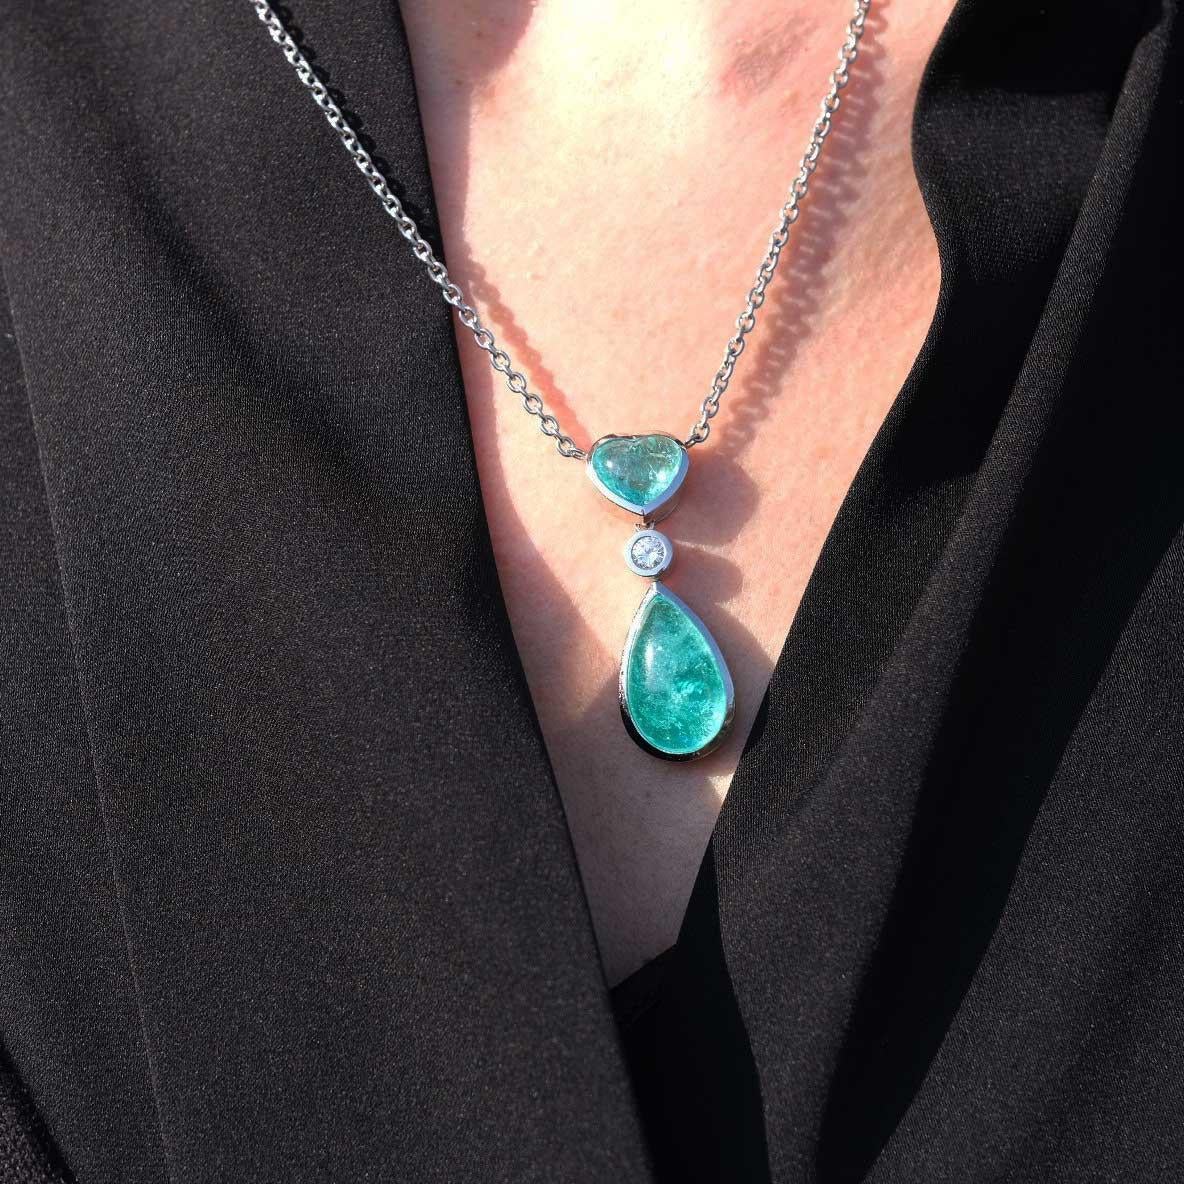 Cabochon Necklace in Platinum with 1 blue/green Paraiba Tourmaline Cabouchon Heart. For Sale